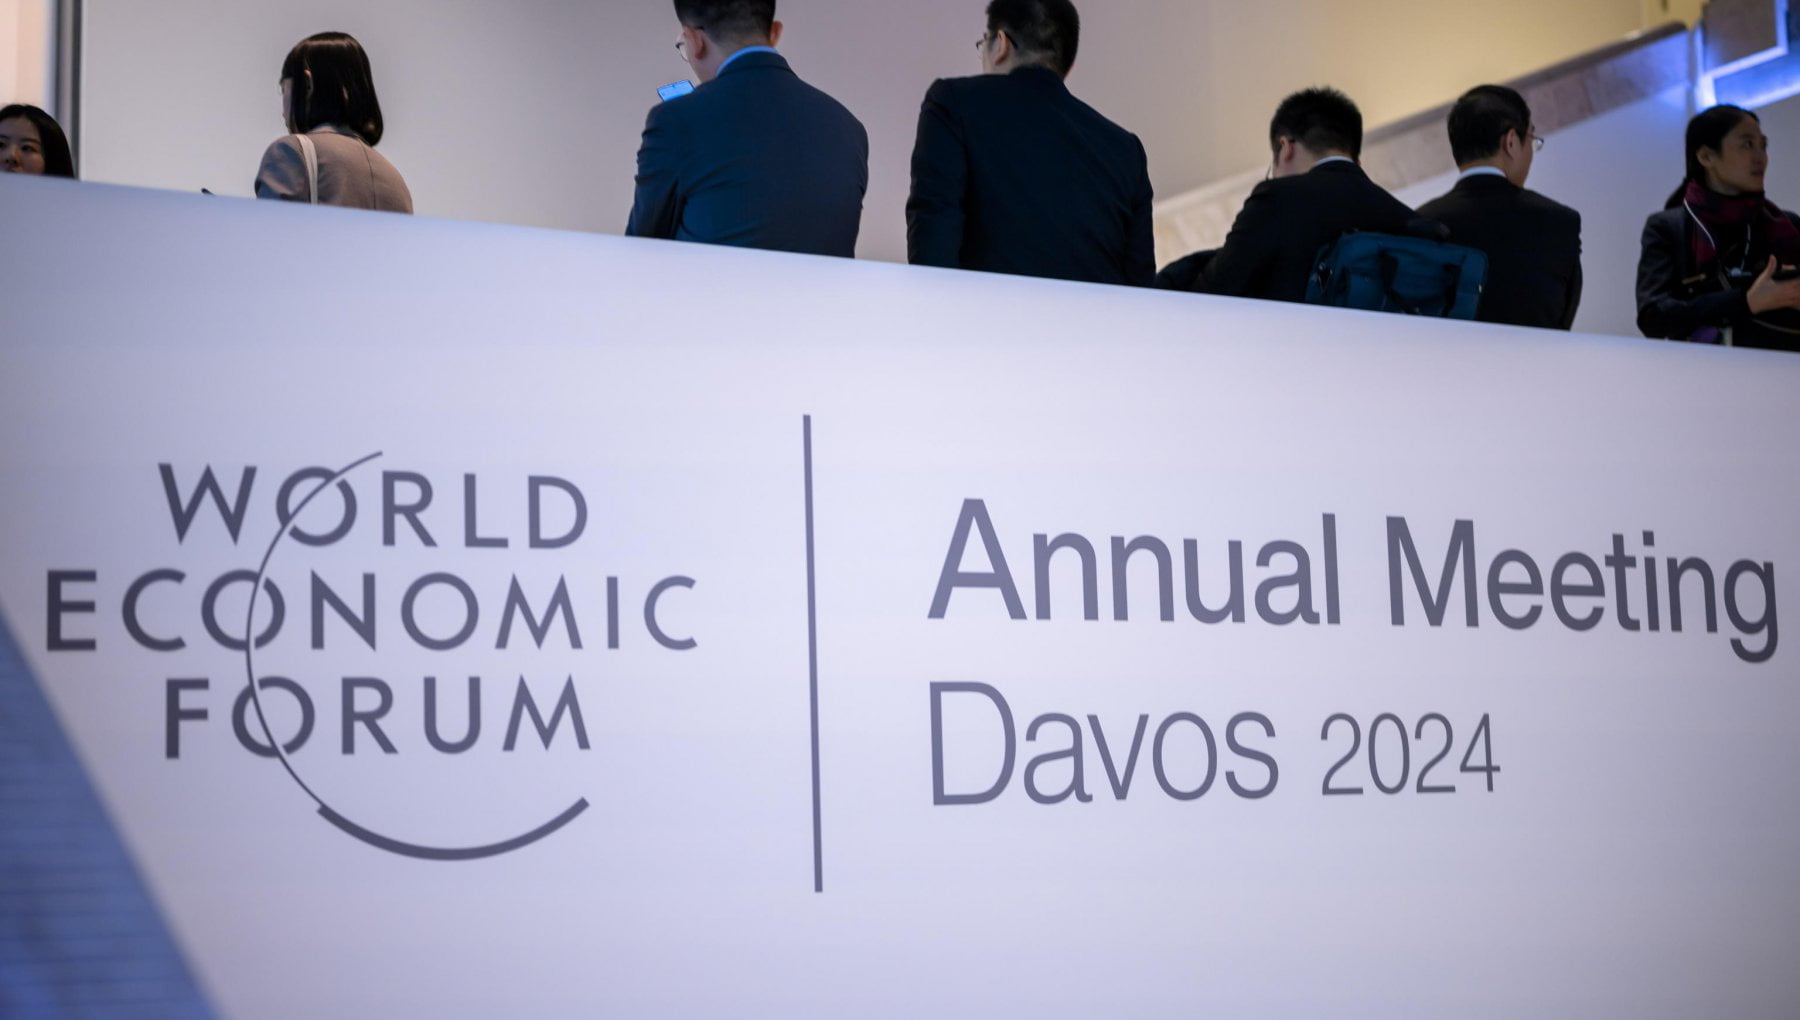 Climate crisis takes center stage at Davos: 'existential threat'